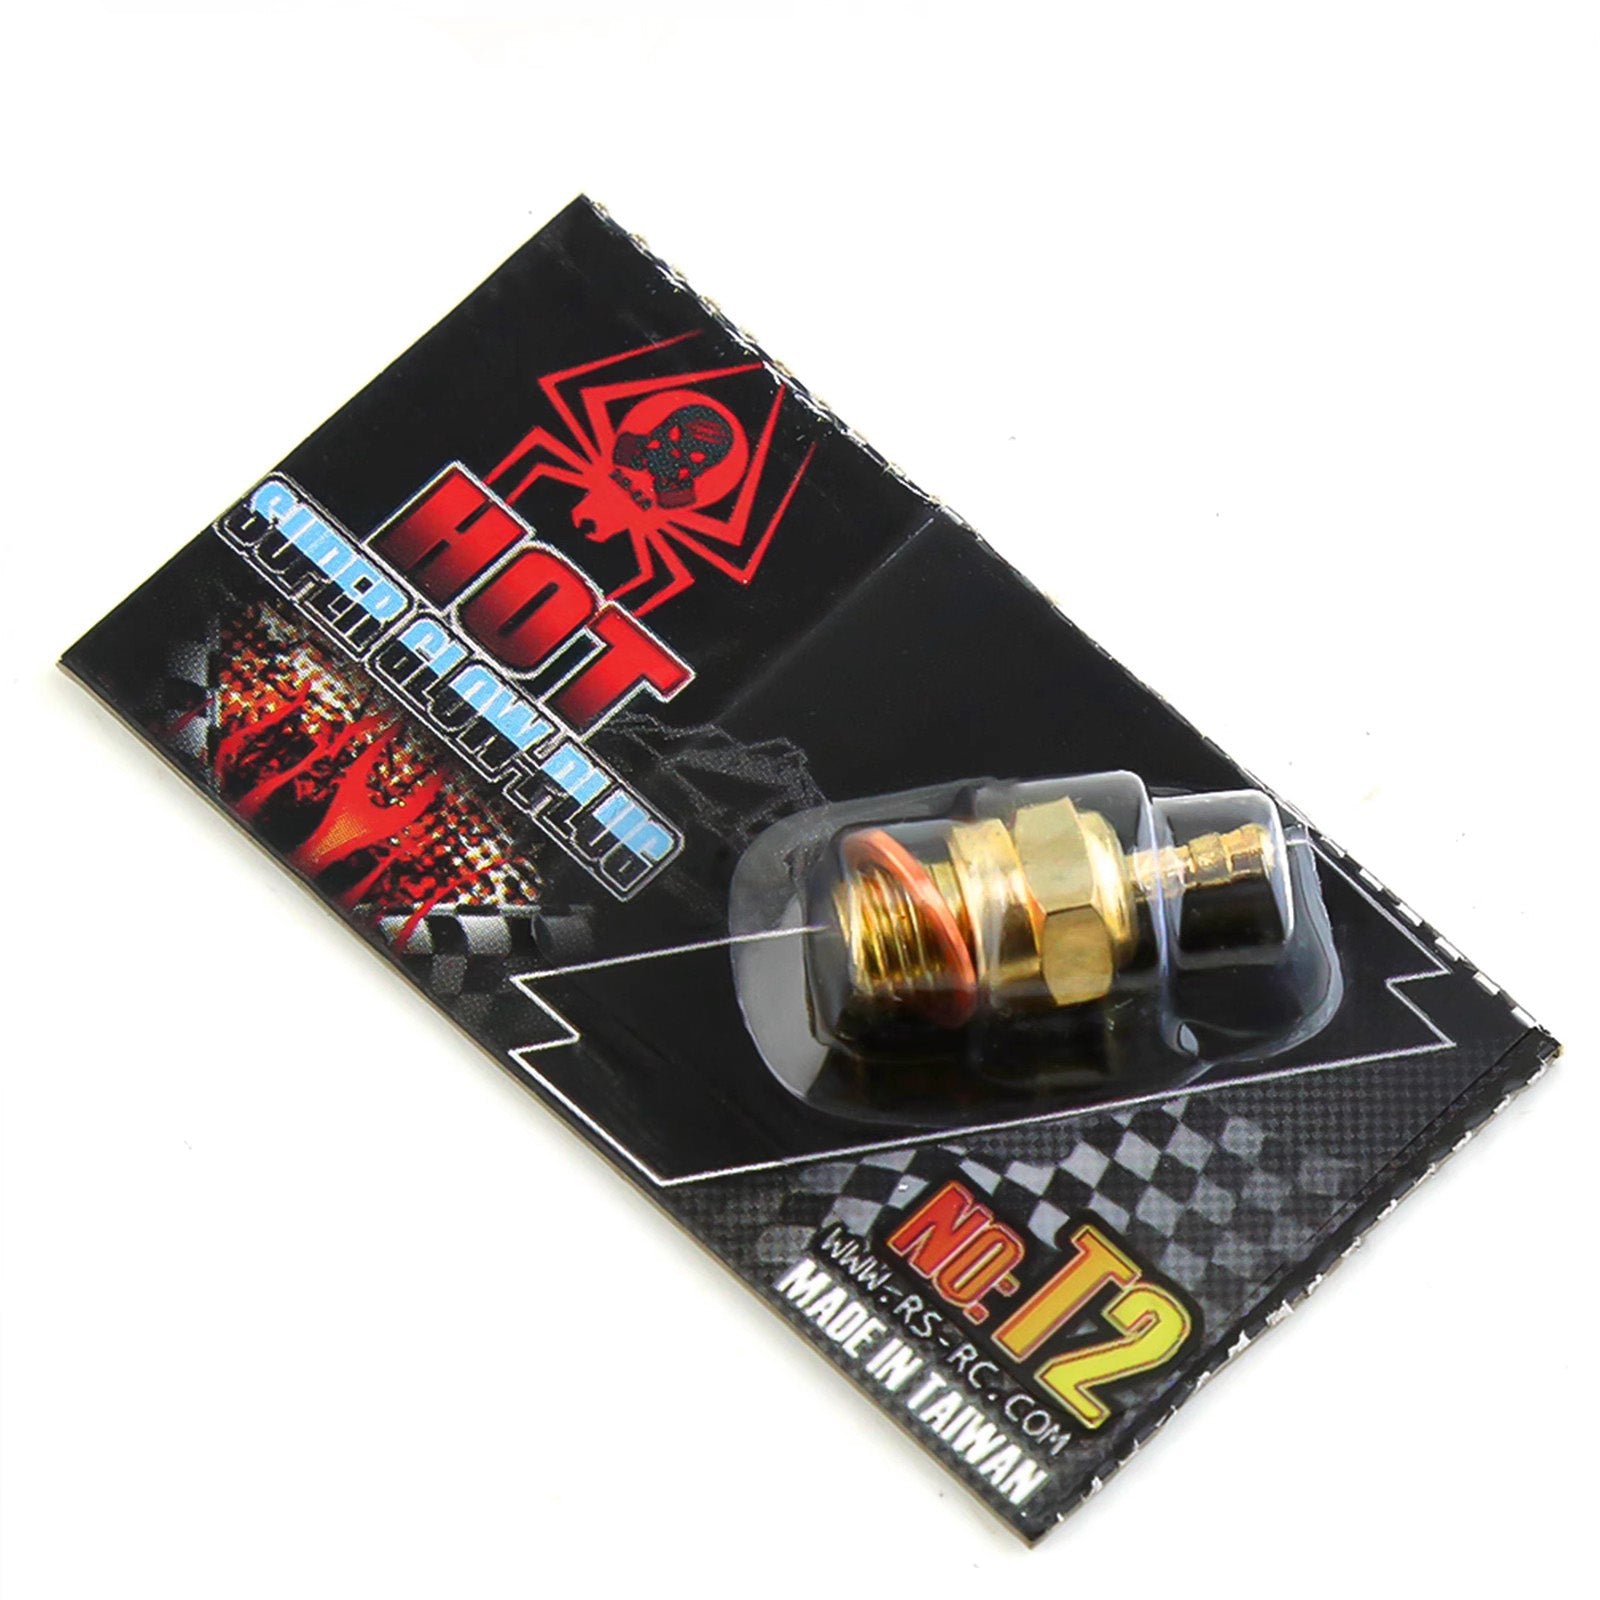 RS NO T2 Electric Super Glow Plug for RC Nitro / Methanol Engine Models - stirlingkit